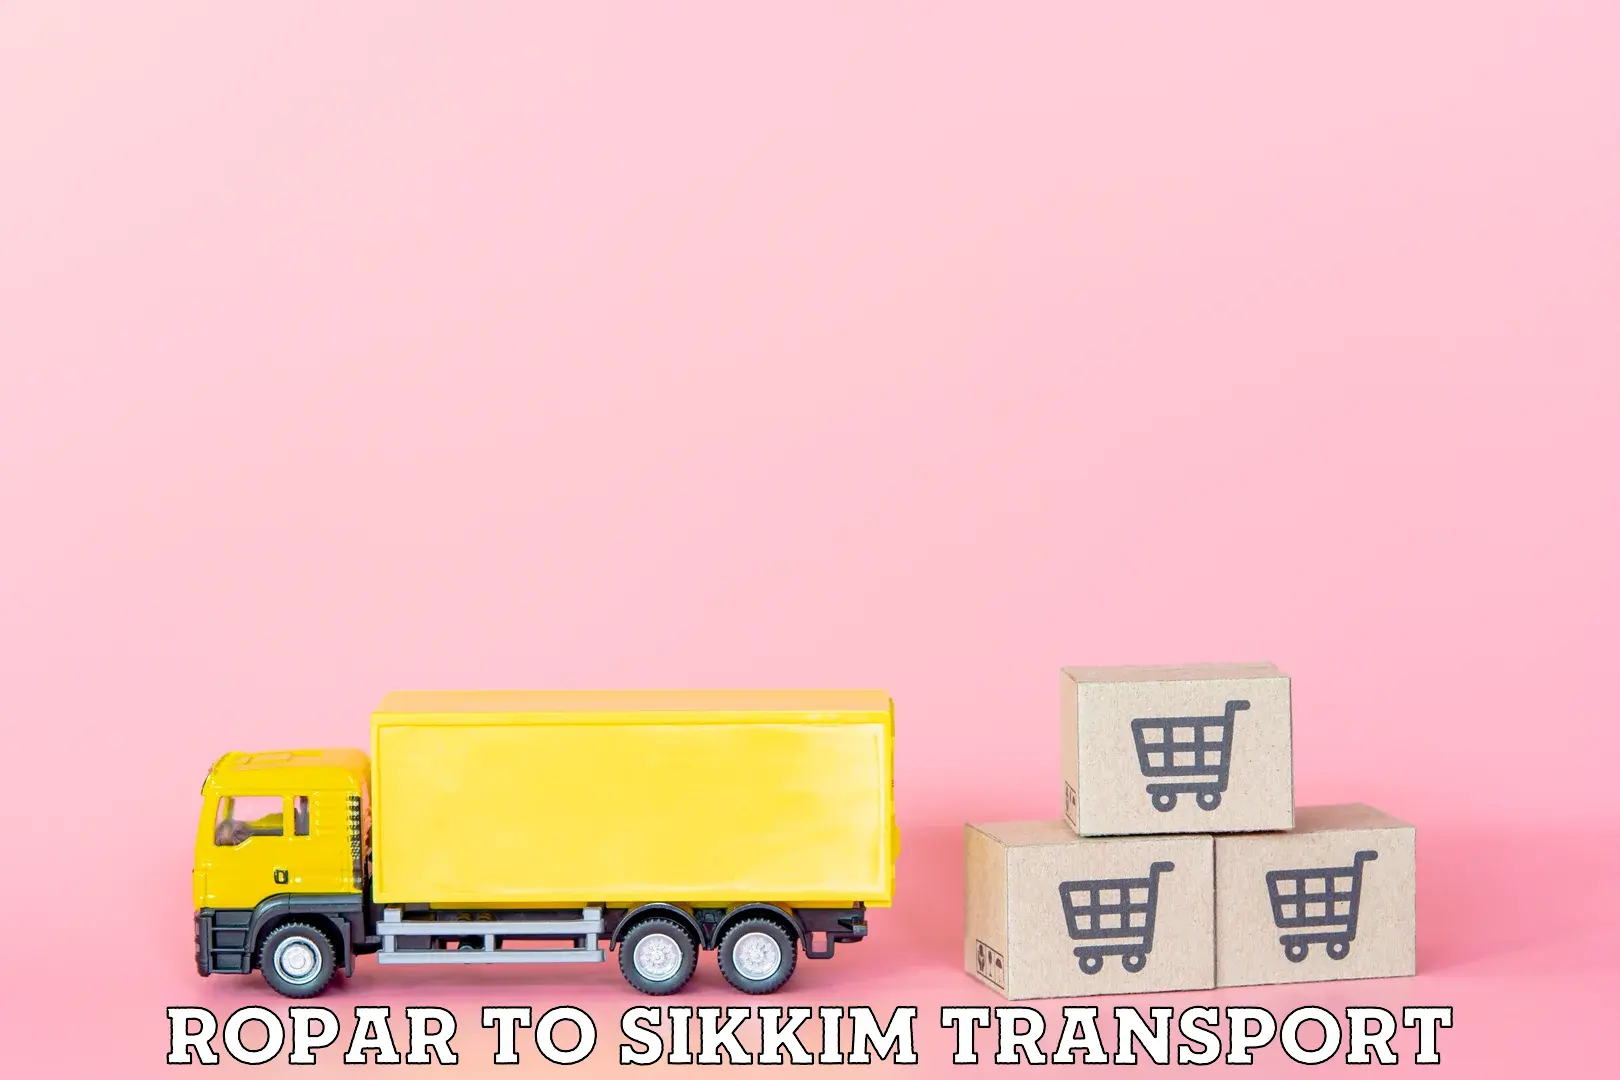 Container transport service Ropar to Sikkim